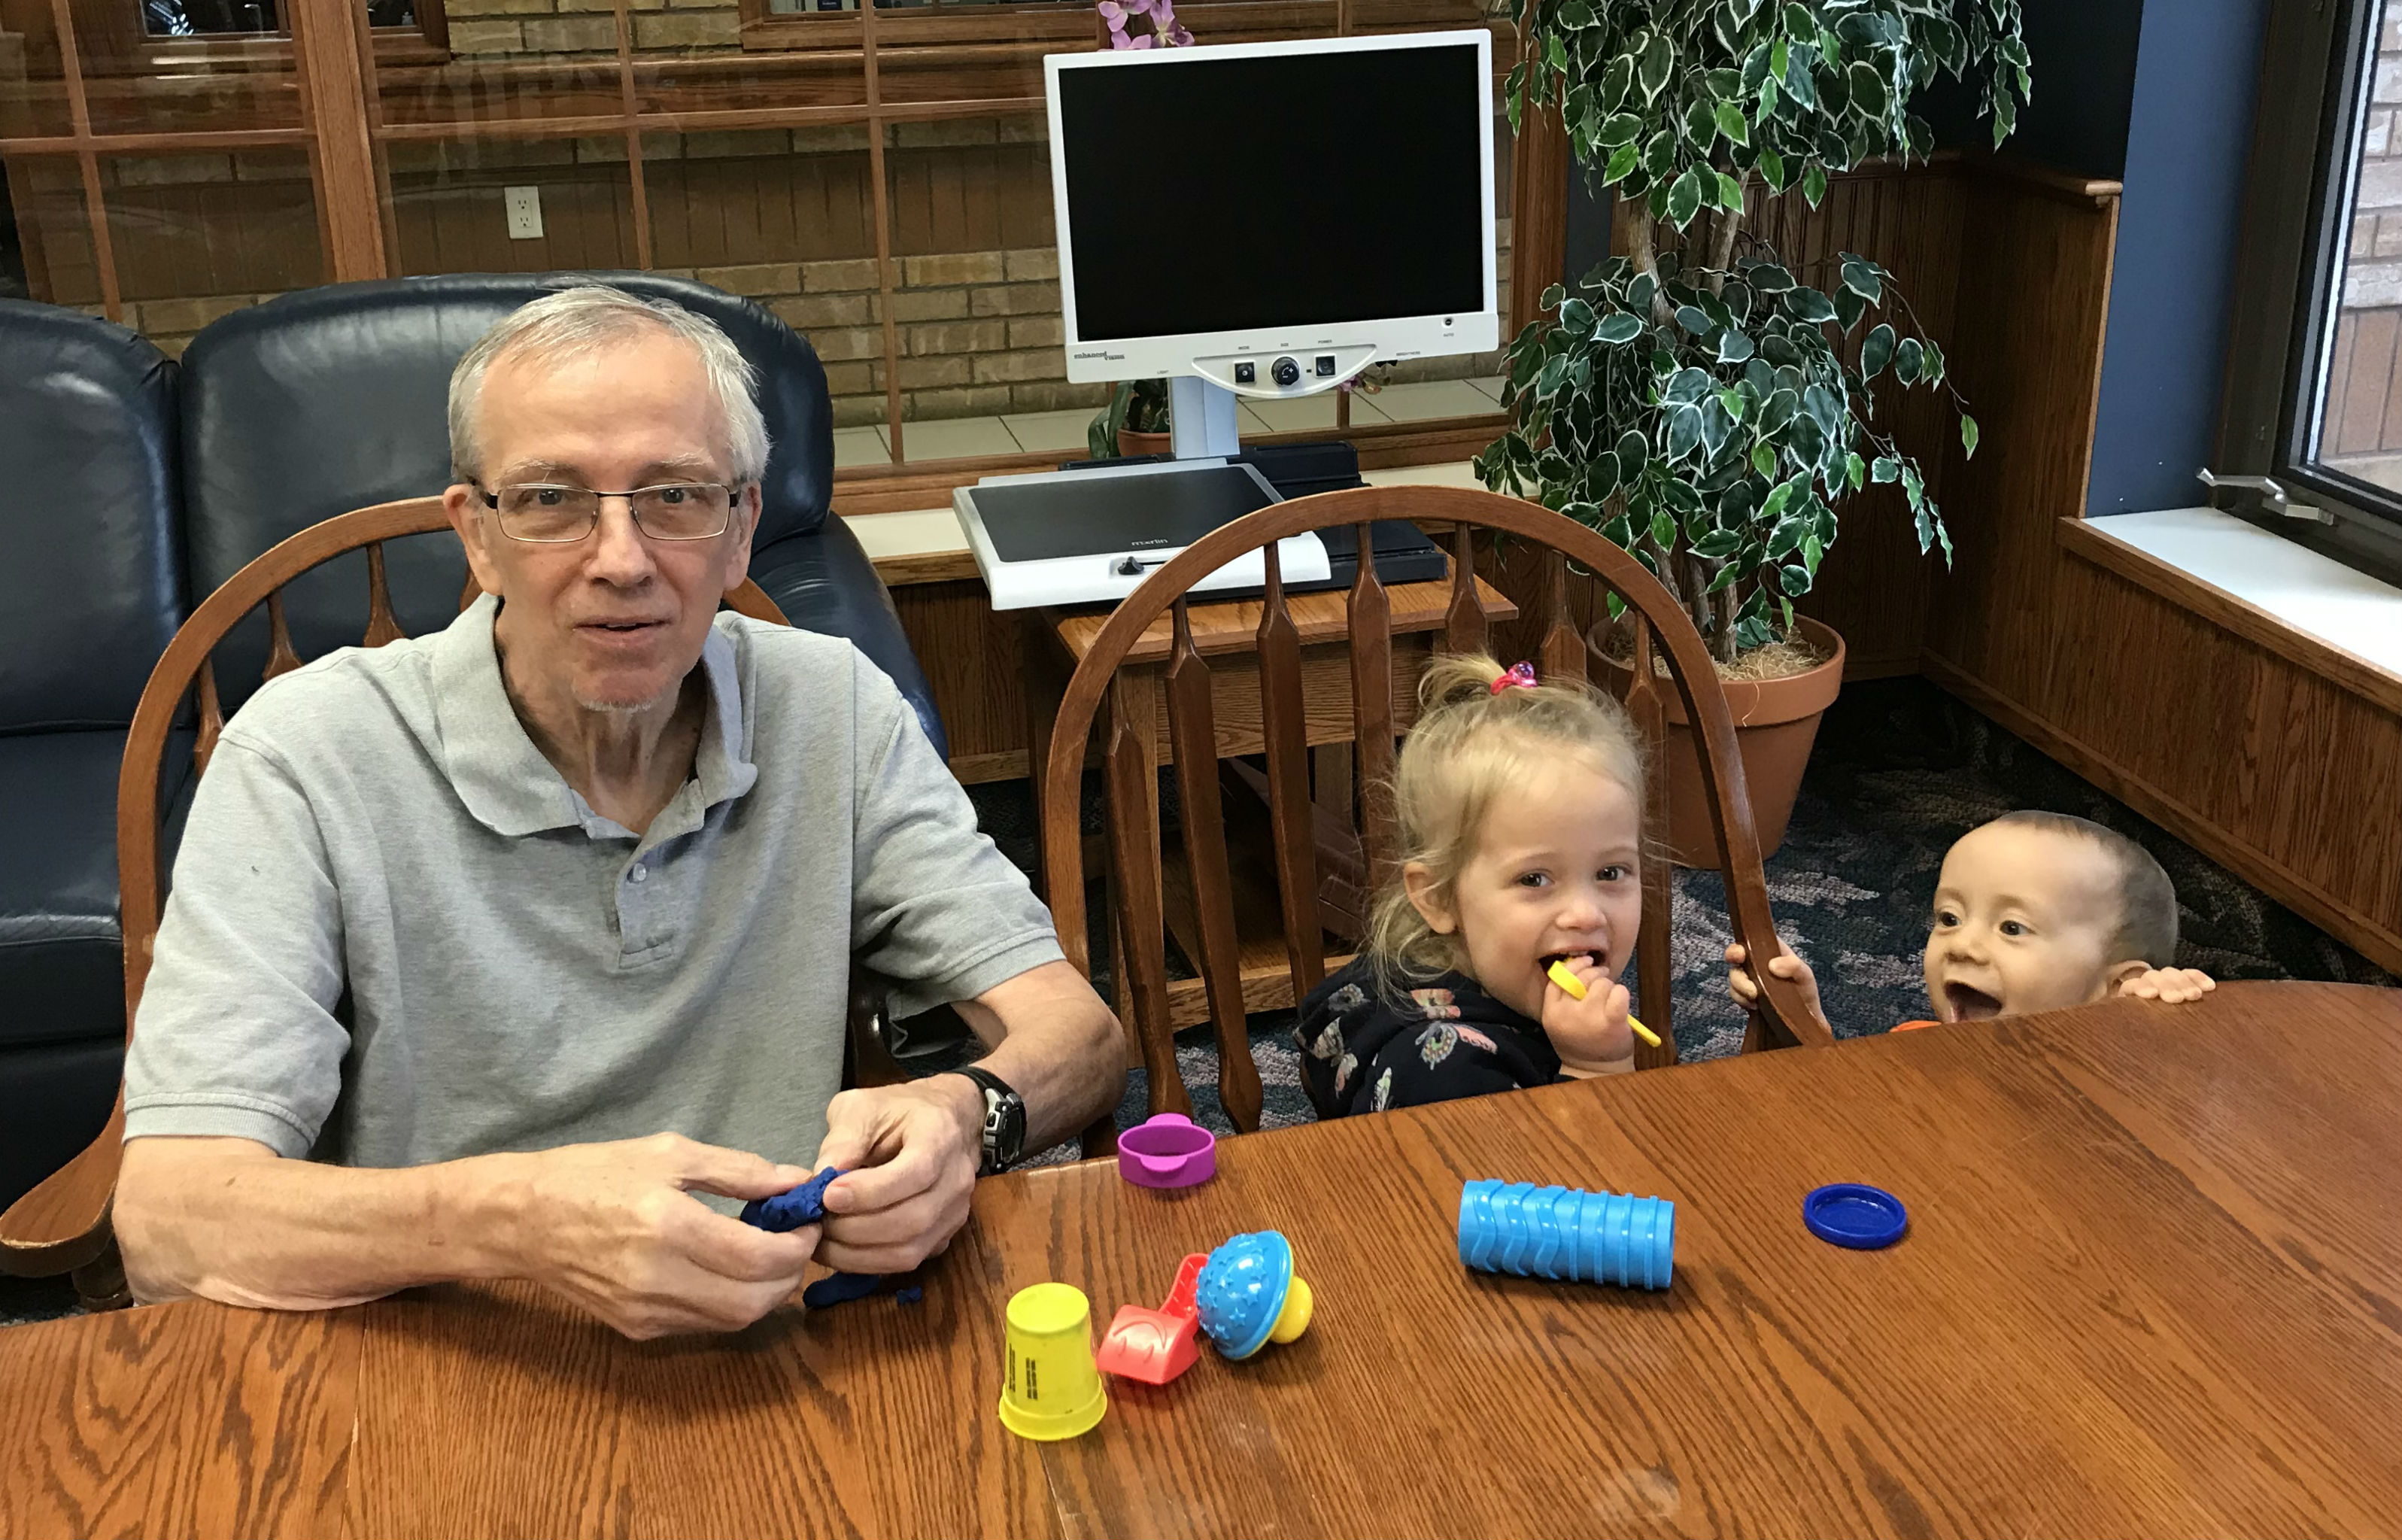 Norm, Ivy and Wes at a recent visit to Riverside Glen. Ivy "has asked every day since then if we can go back to Pop-Pop’s place to play playdough,"